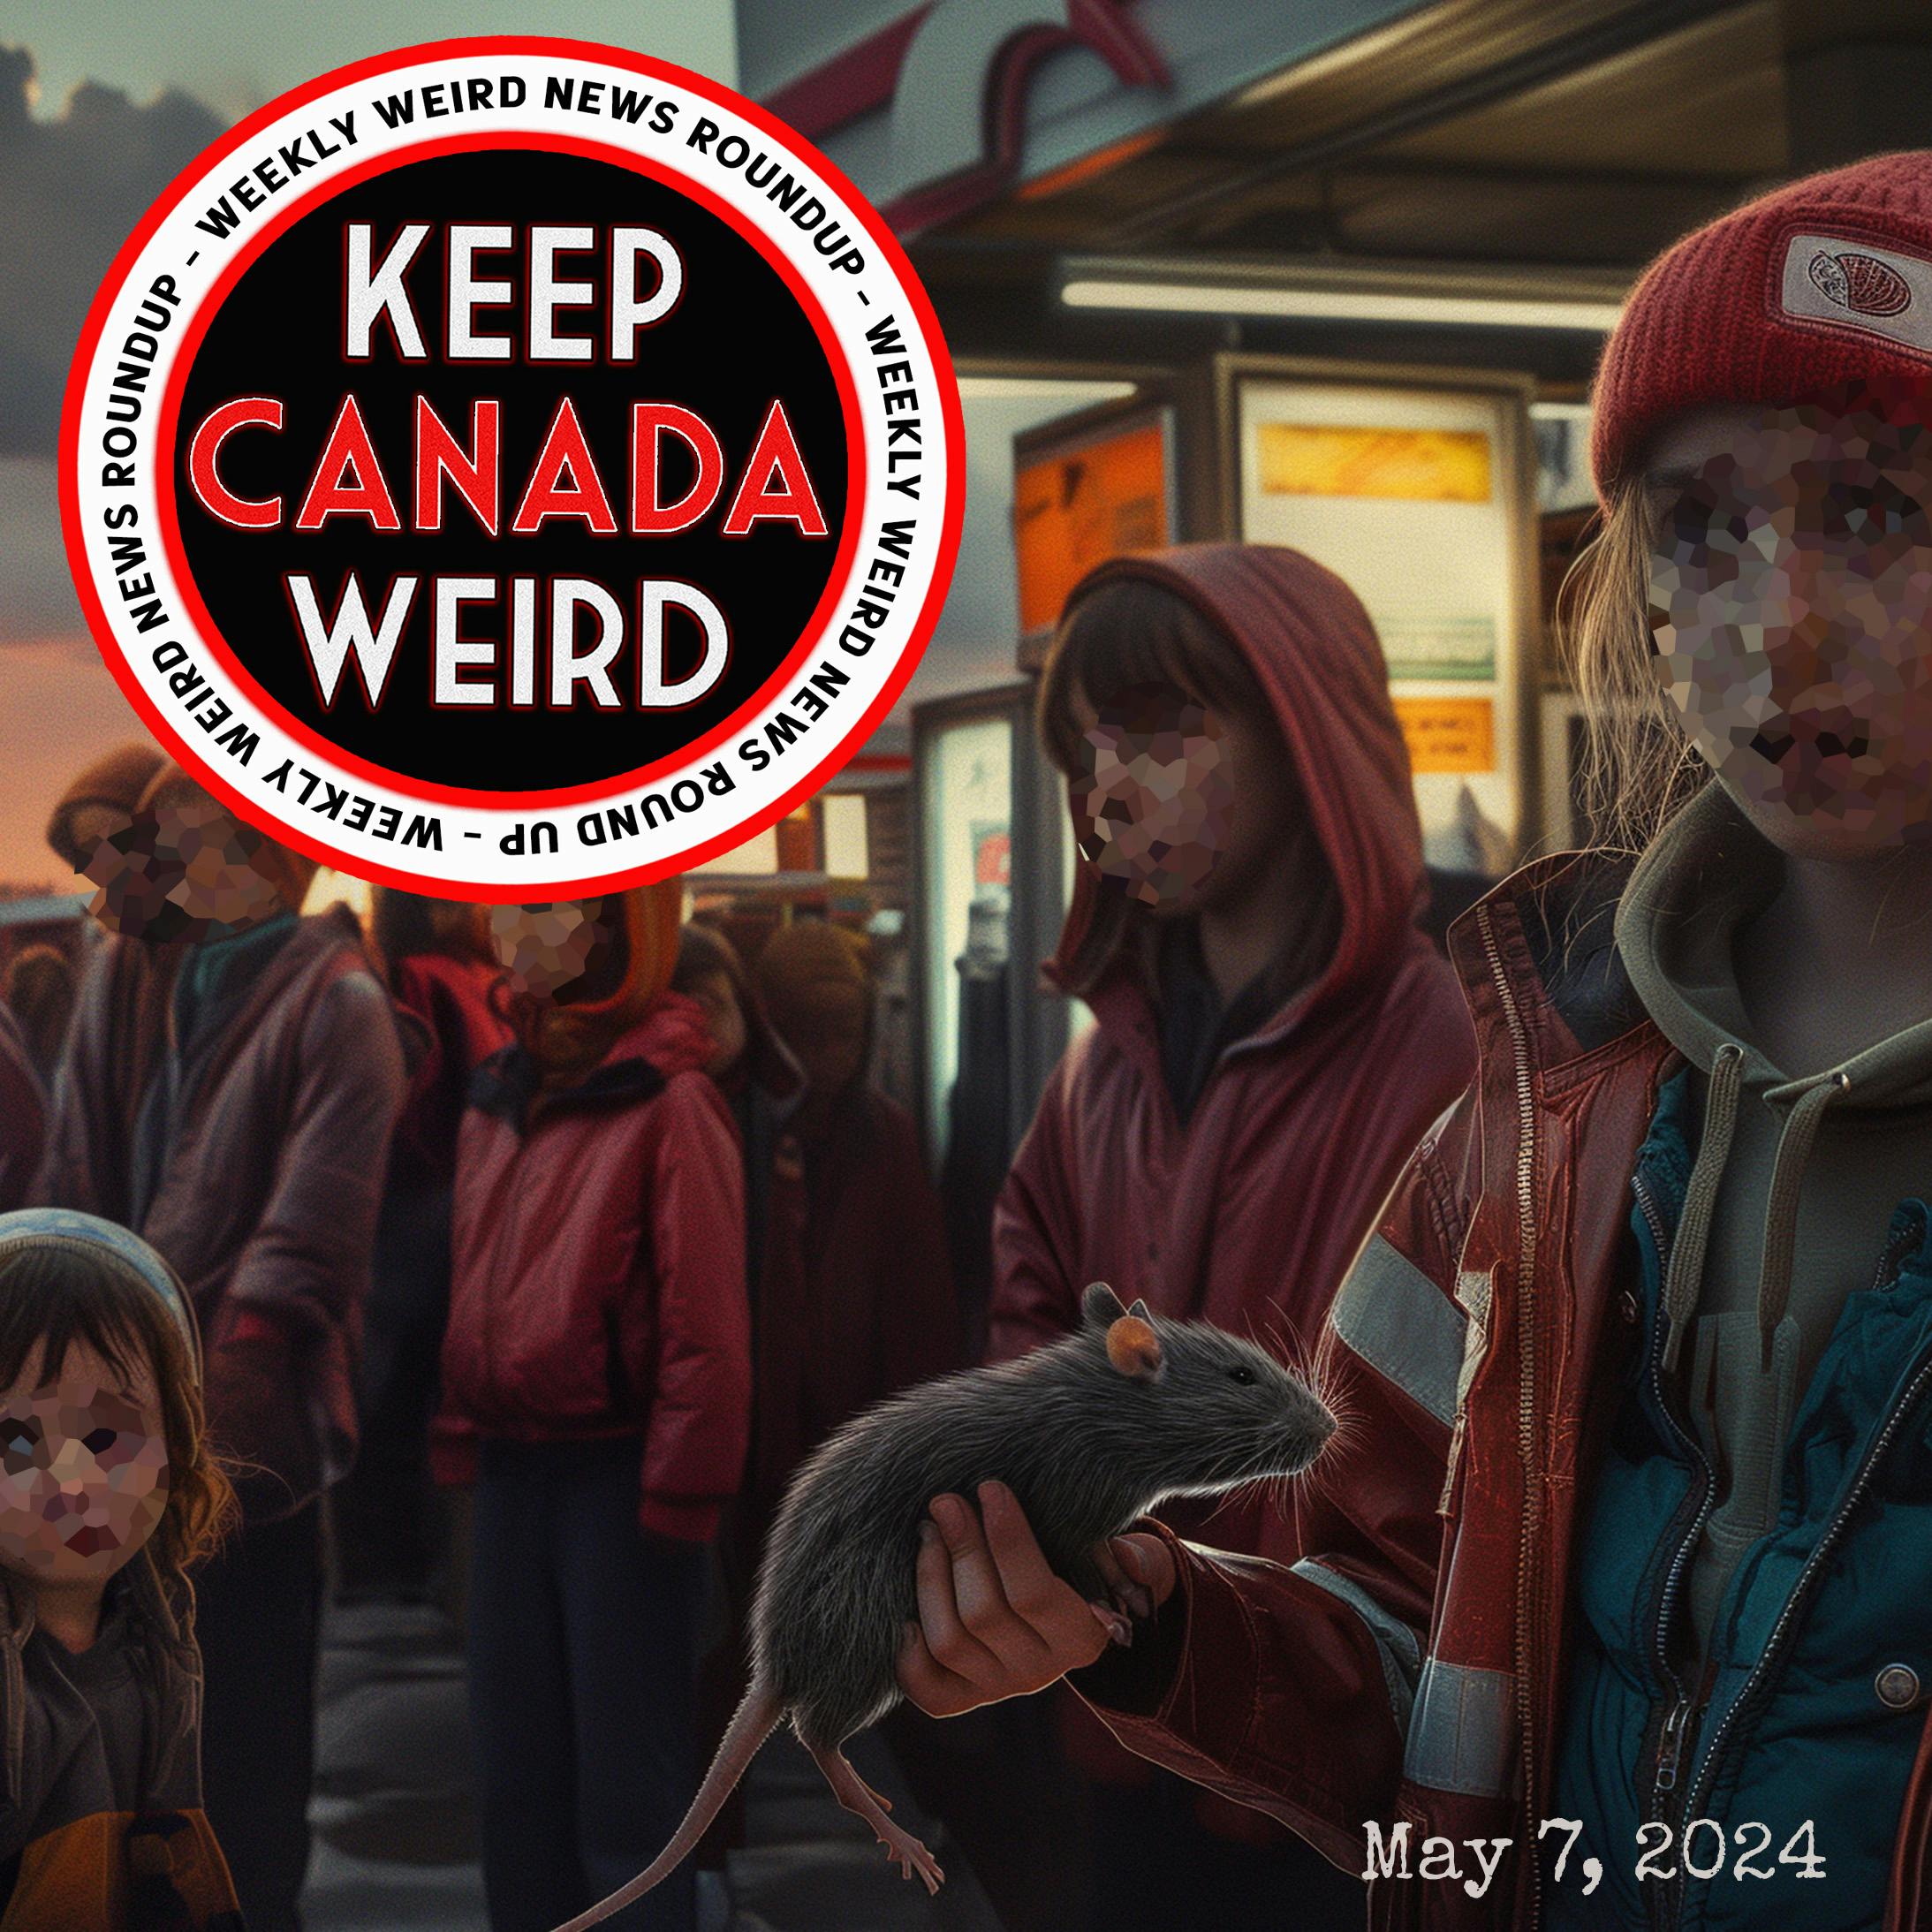 KEEP CANADA WEIRD - May 7, 2024 - Quebec's most prolific sperm donors, rat infestations, and gasoline theft in New Brunswick